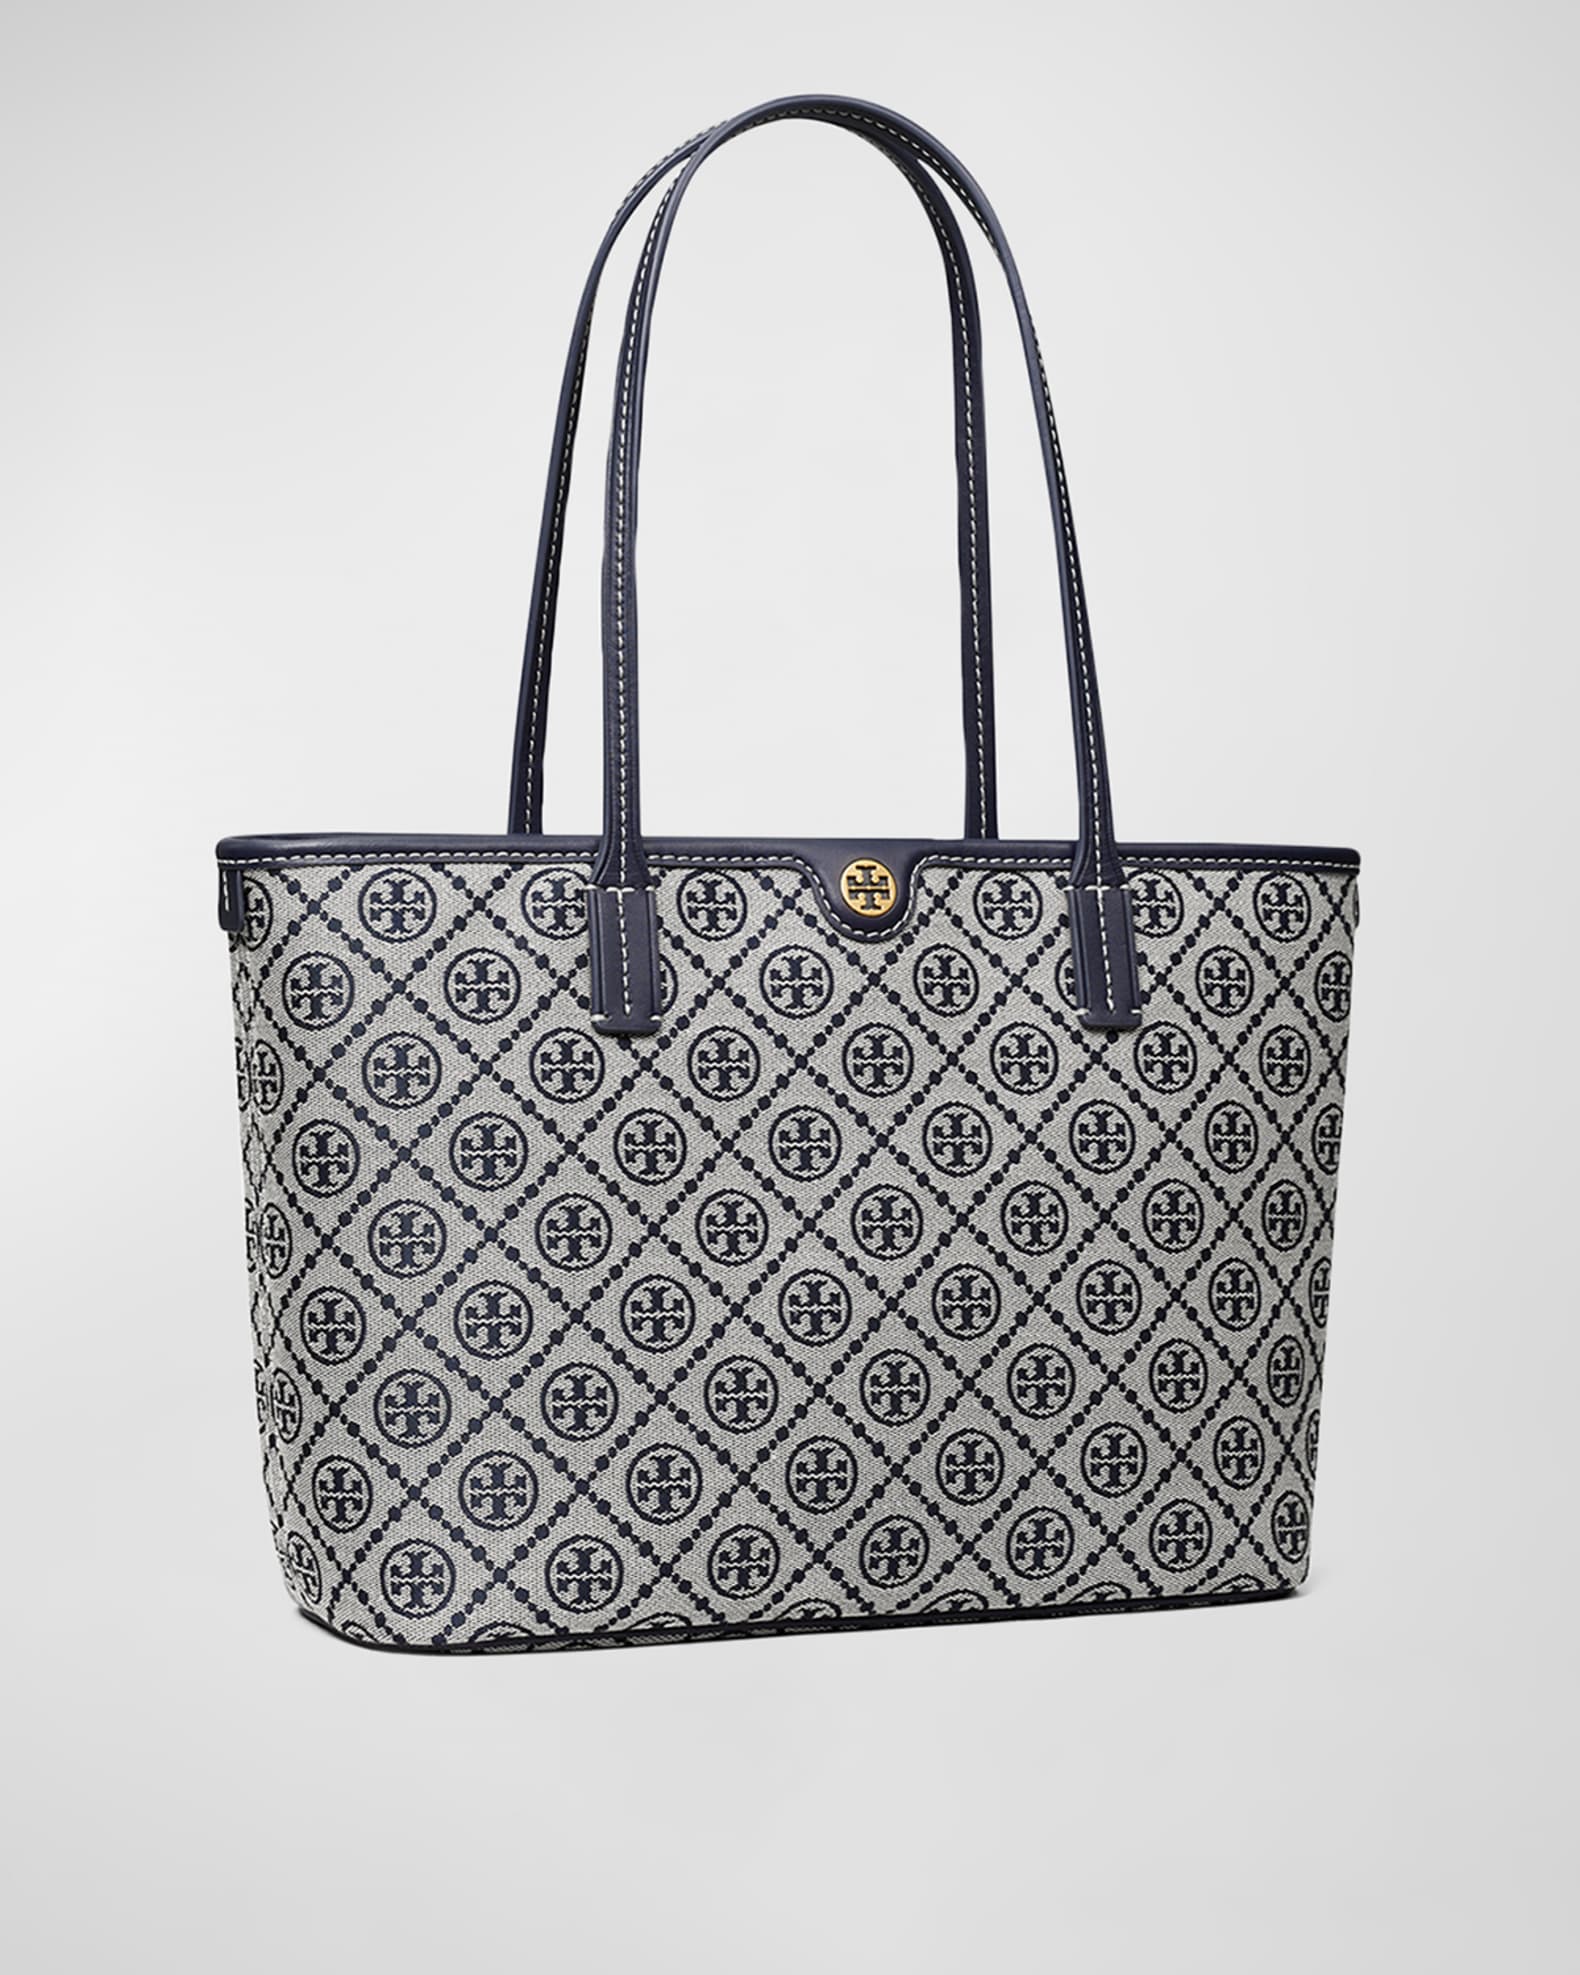 Tory Burch Navy Blue/Beige Coated Canvas T Monogram Tote Tory